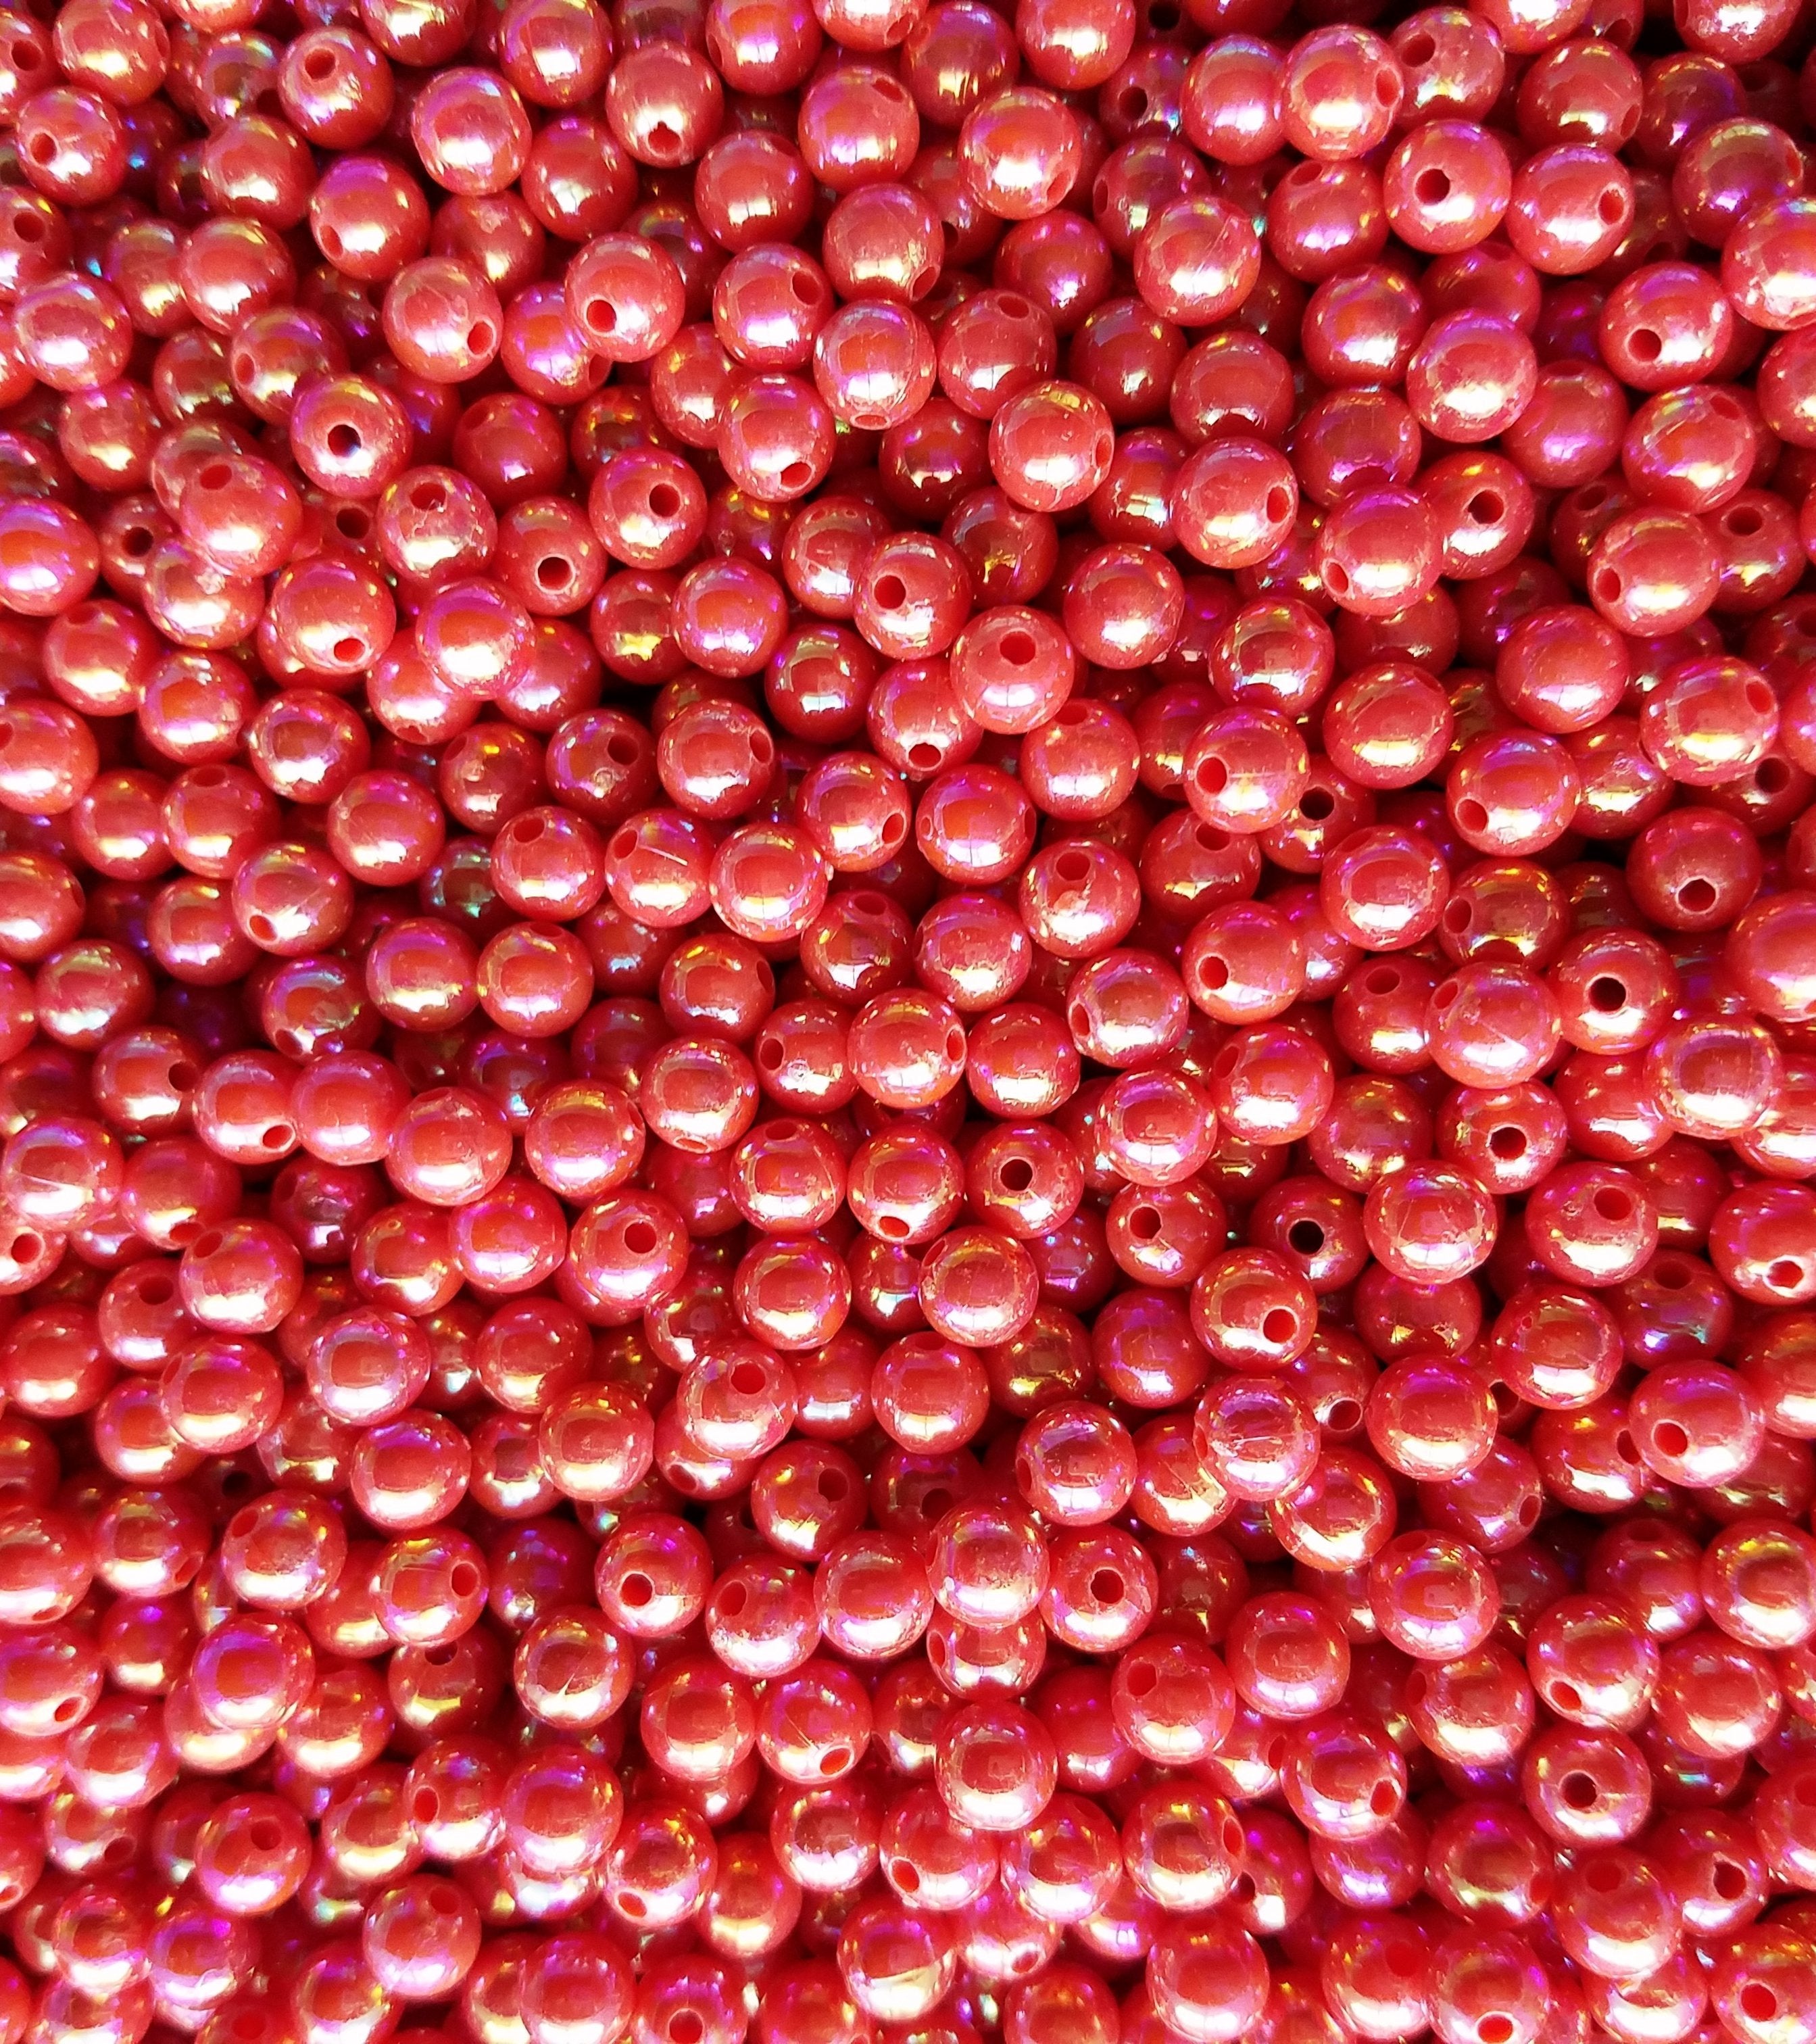 AB77-Pearl Red Beads